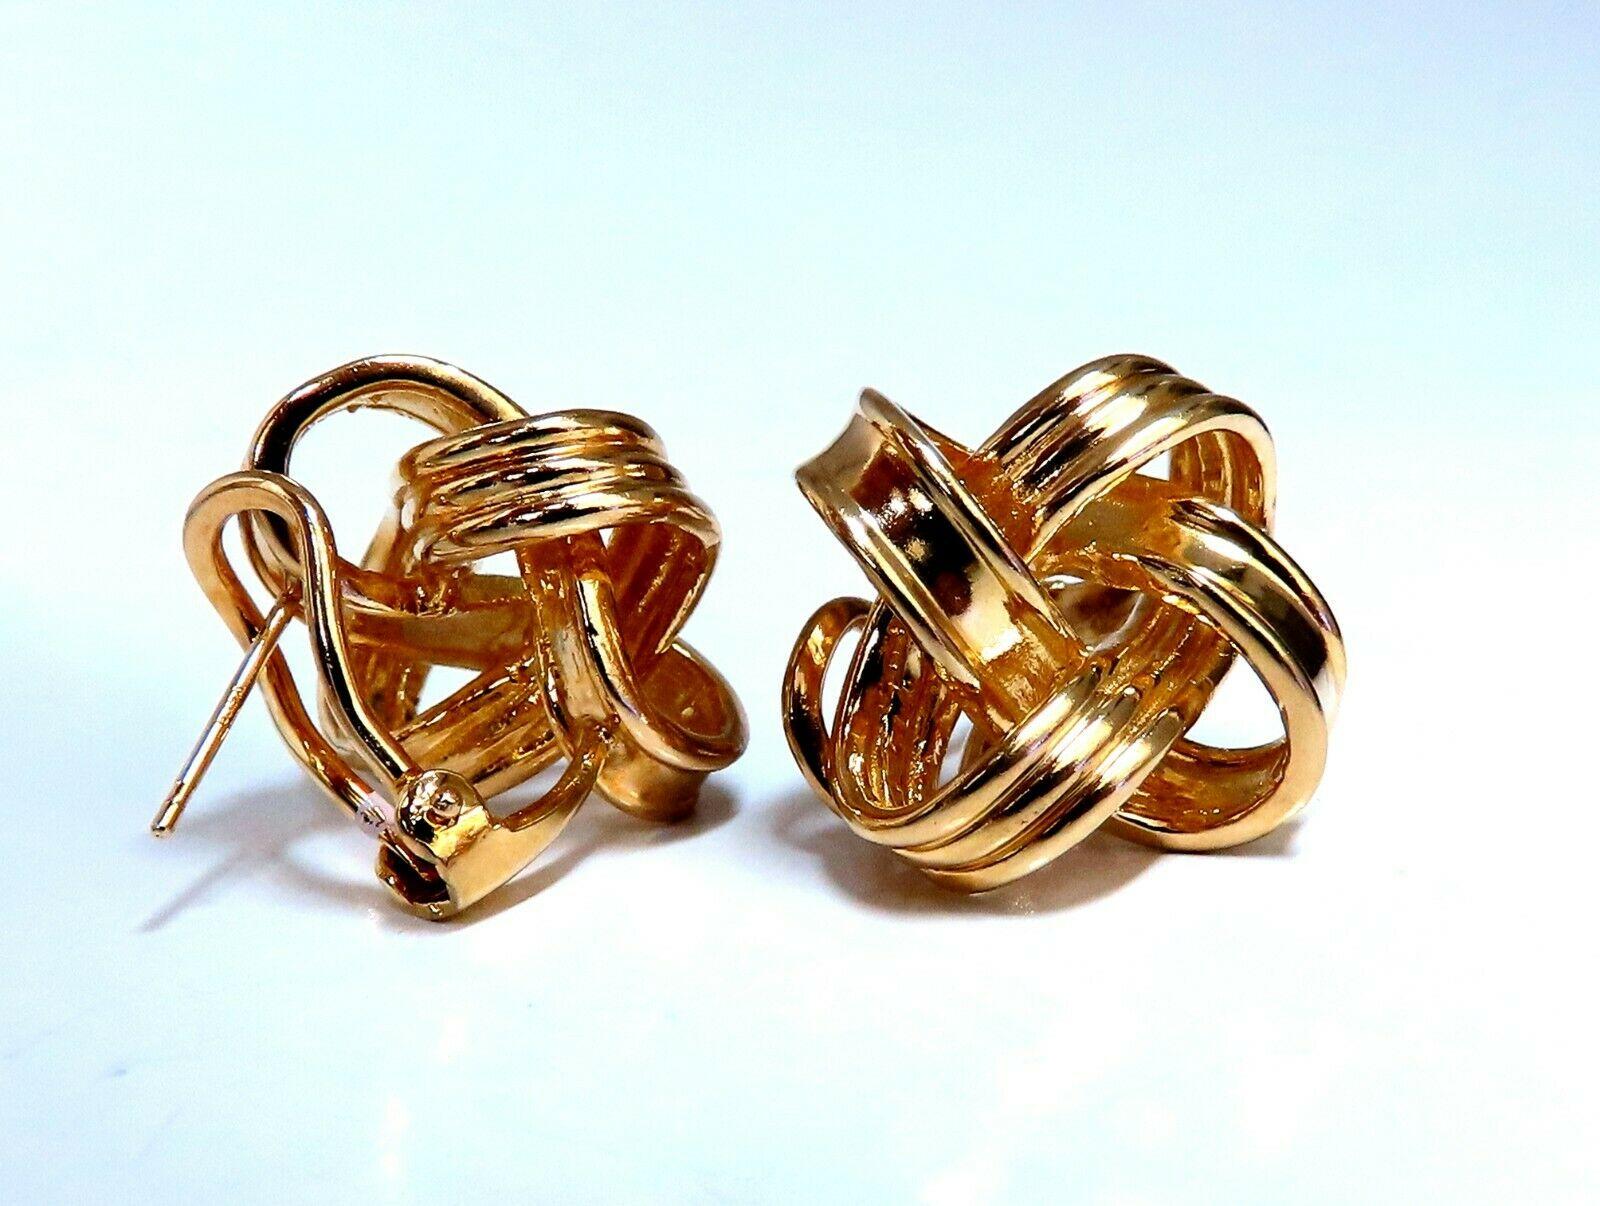 Inverted Knot Textured Clip Earrings

Measurements of Earrings:

Measurements: 

.82 x .67 Inch

Depth: .30 inch

Comfortable Omega Clips

14.2 grams / 14kt. Yellow Gold

Earrings are gorgeous made